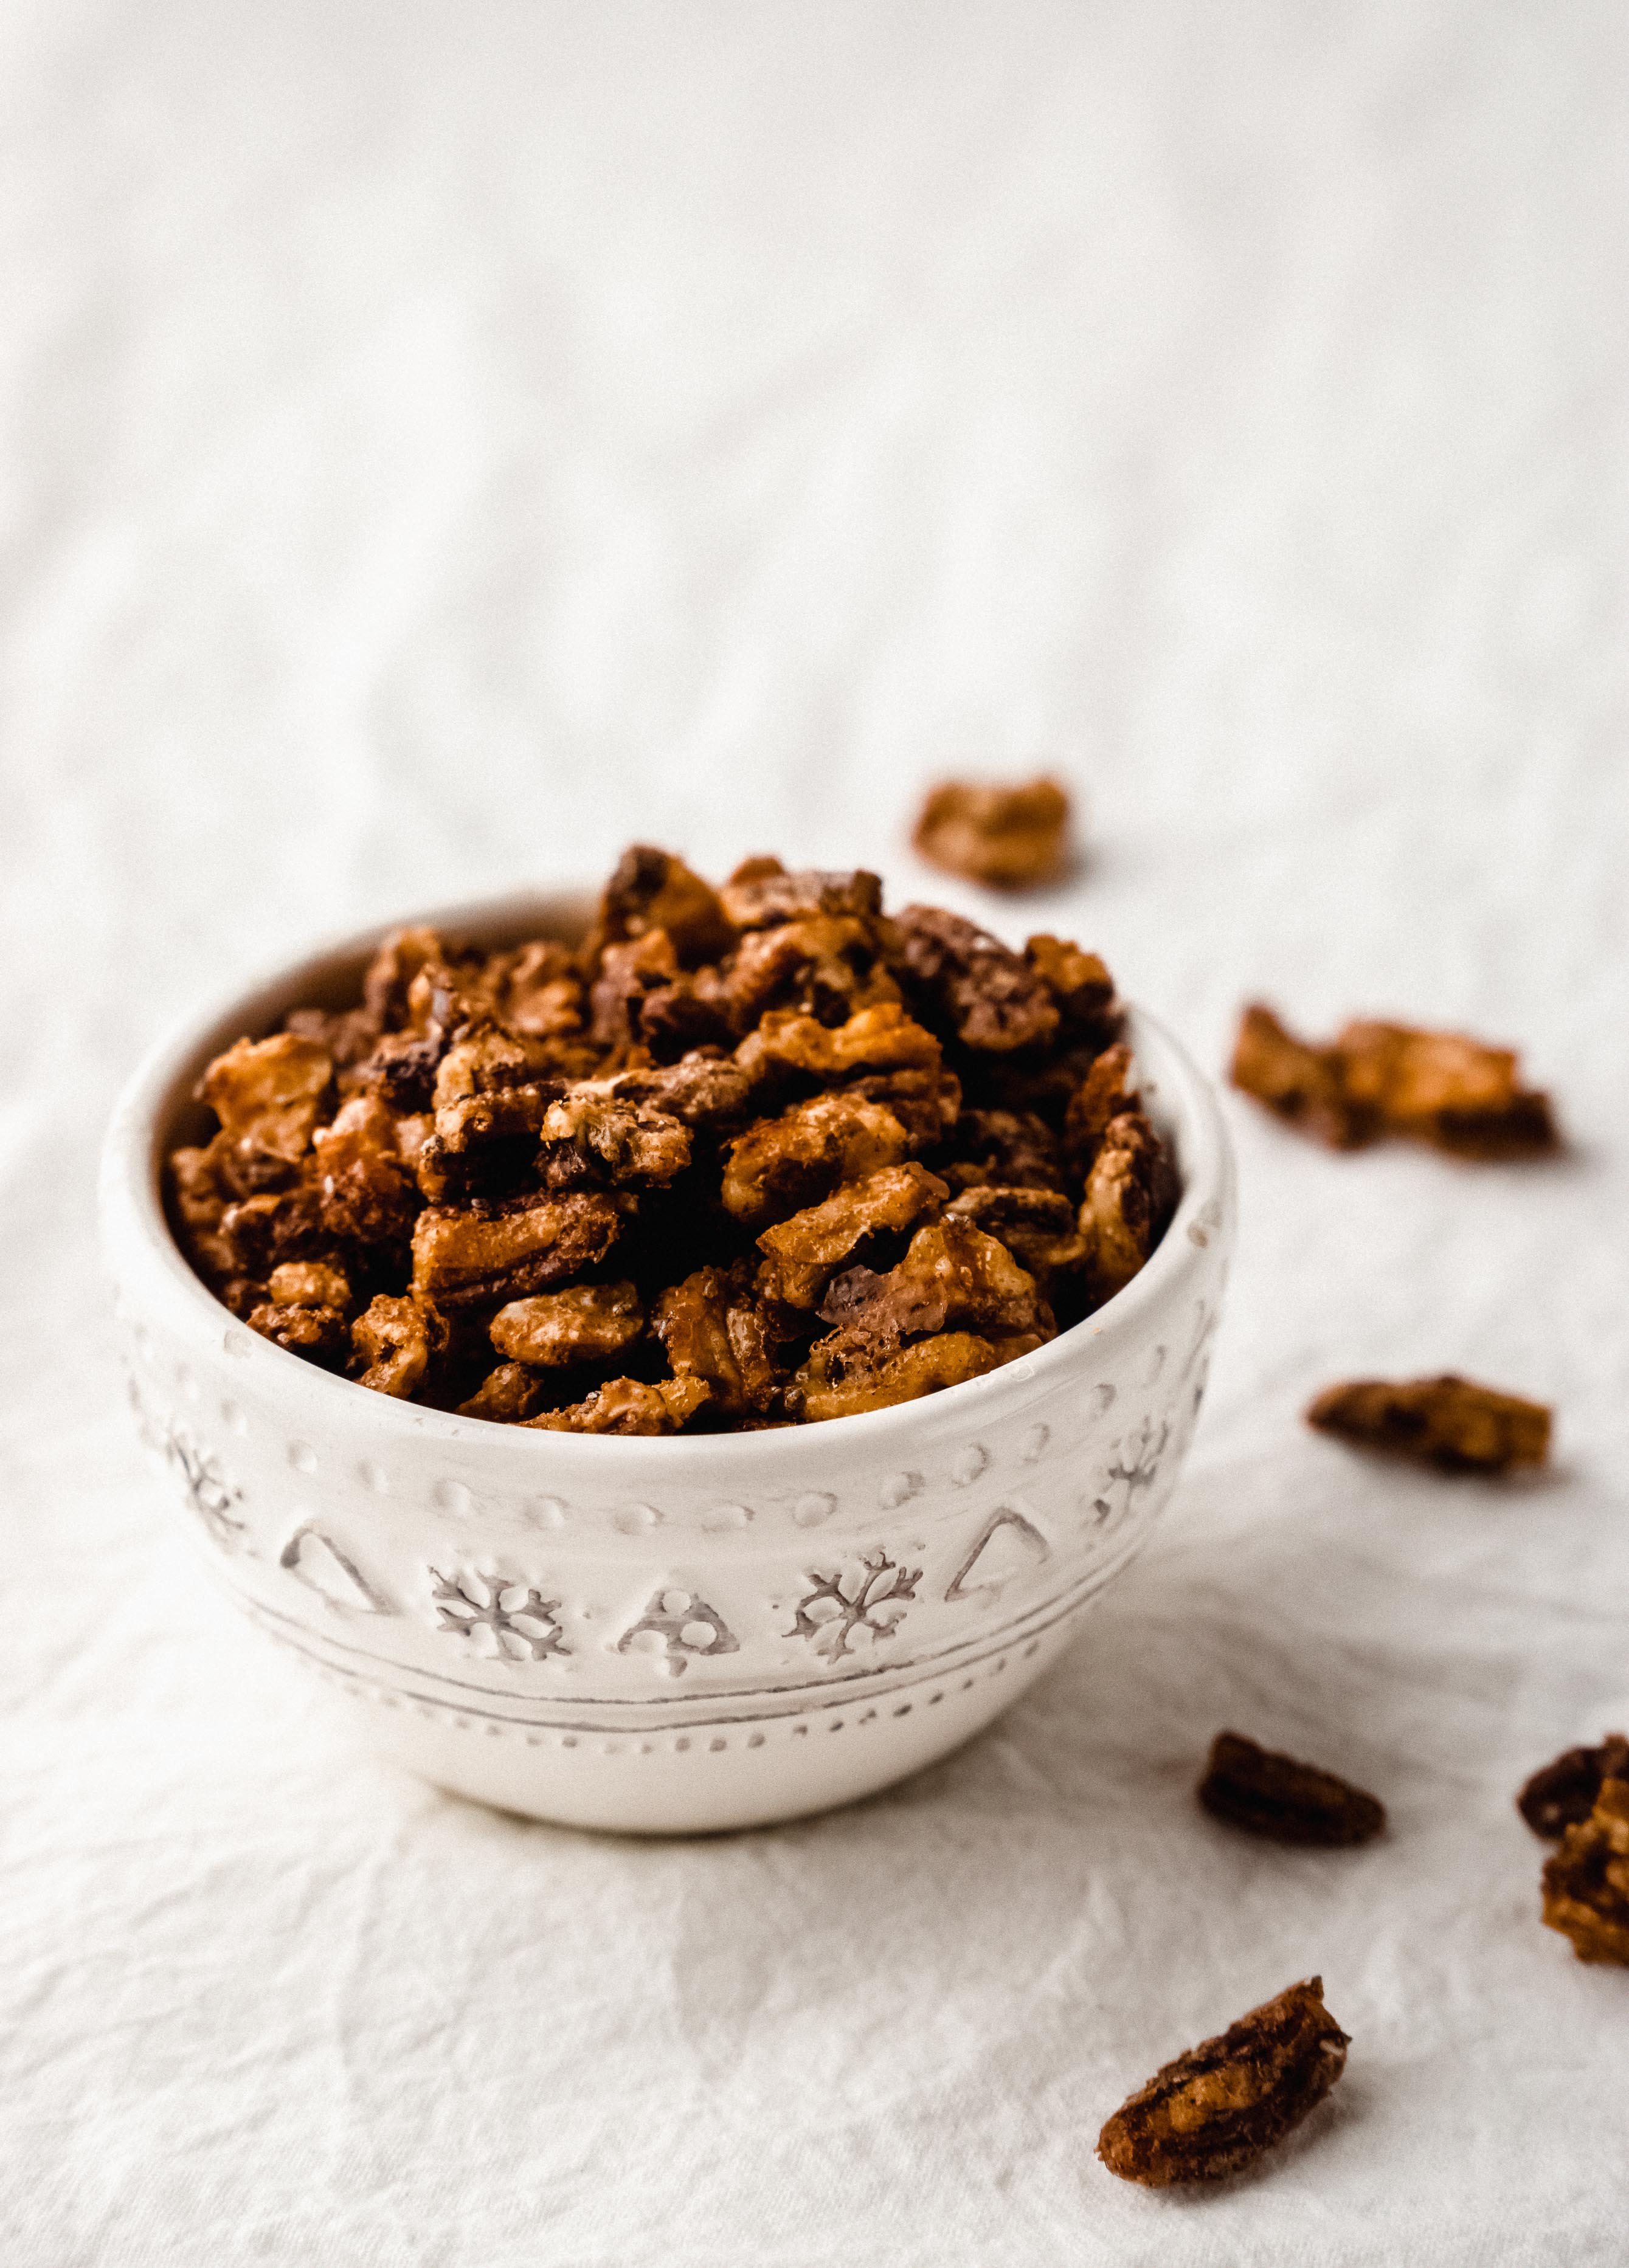 Candied spicy nut mix